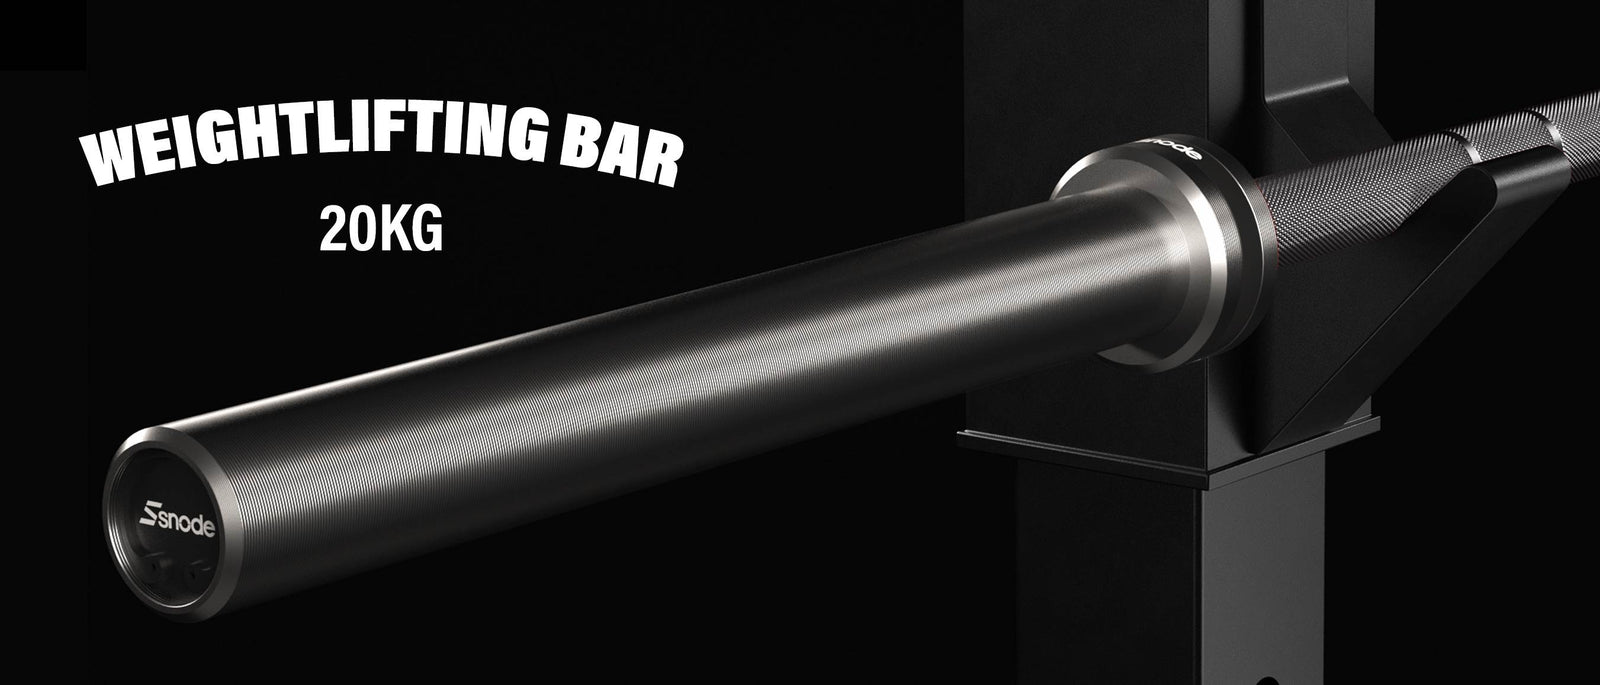 28mm barbell